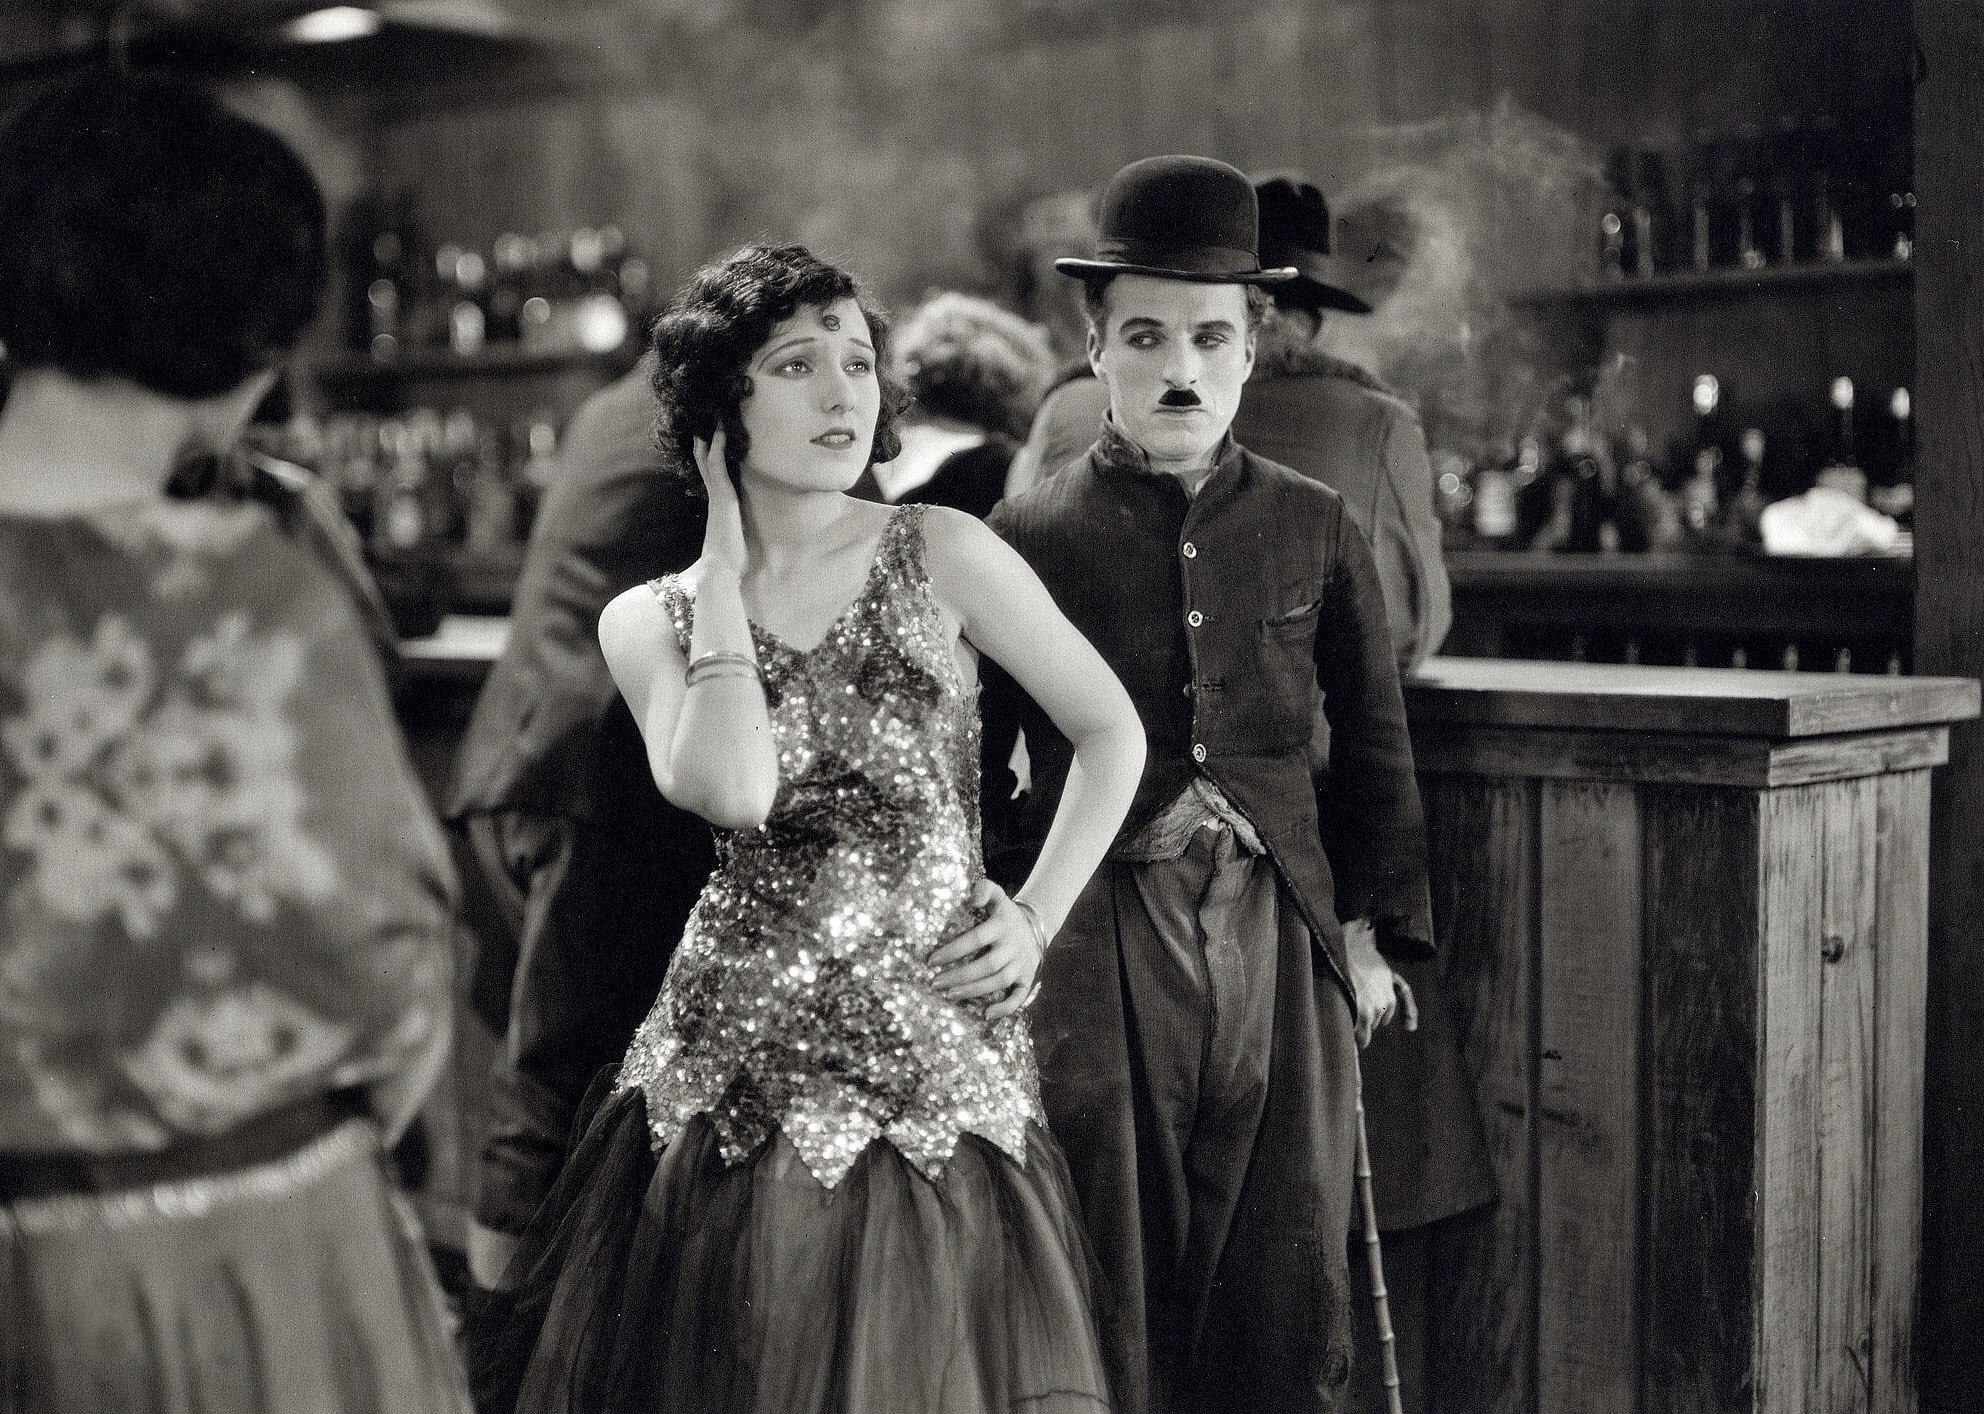 Charles Chaplin in a bar with a woman in a sparkly dress.